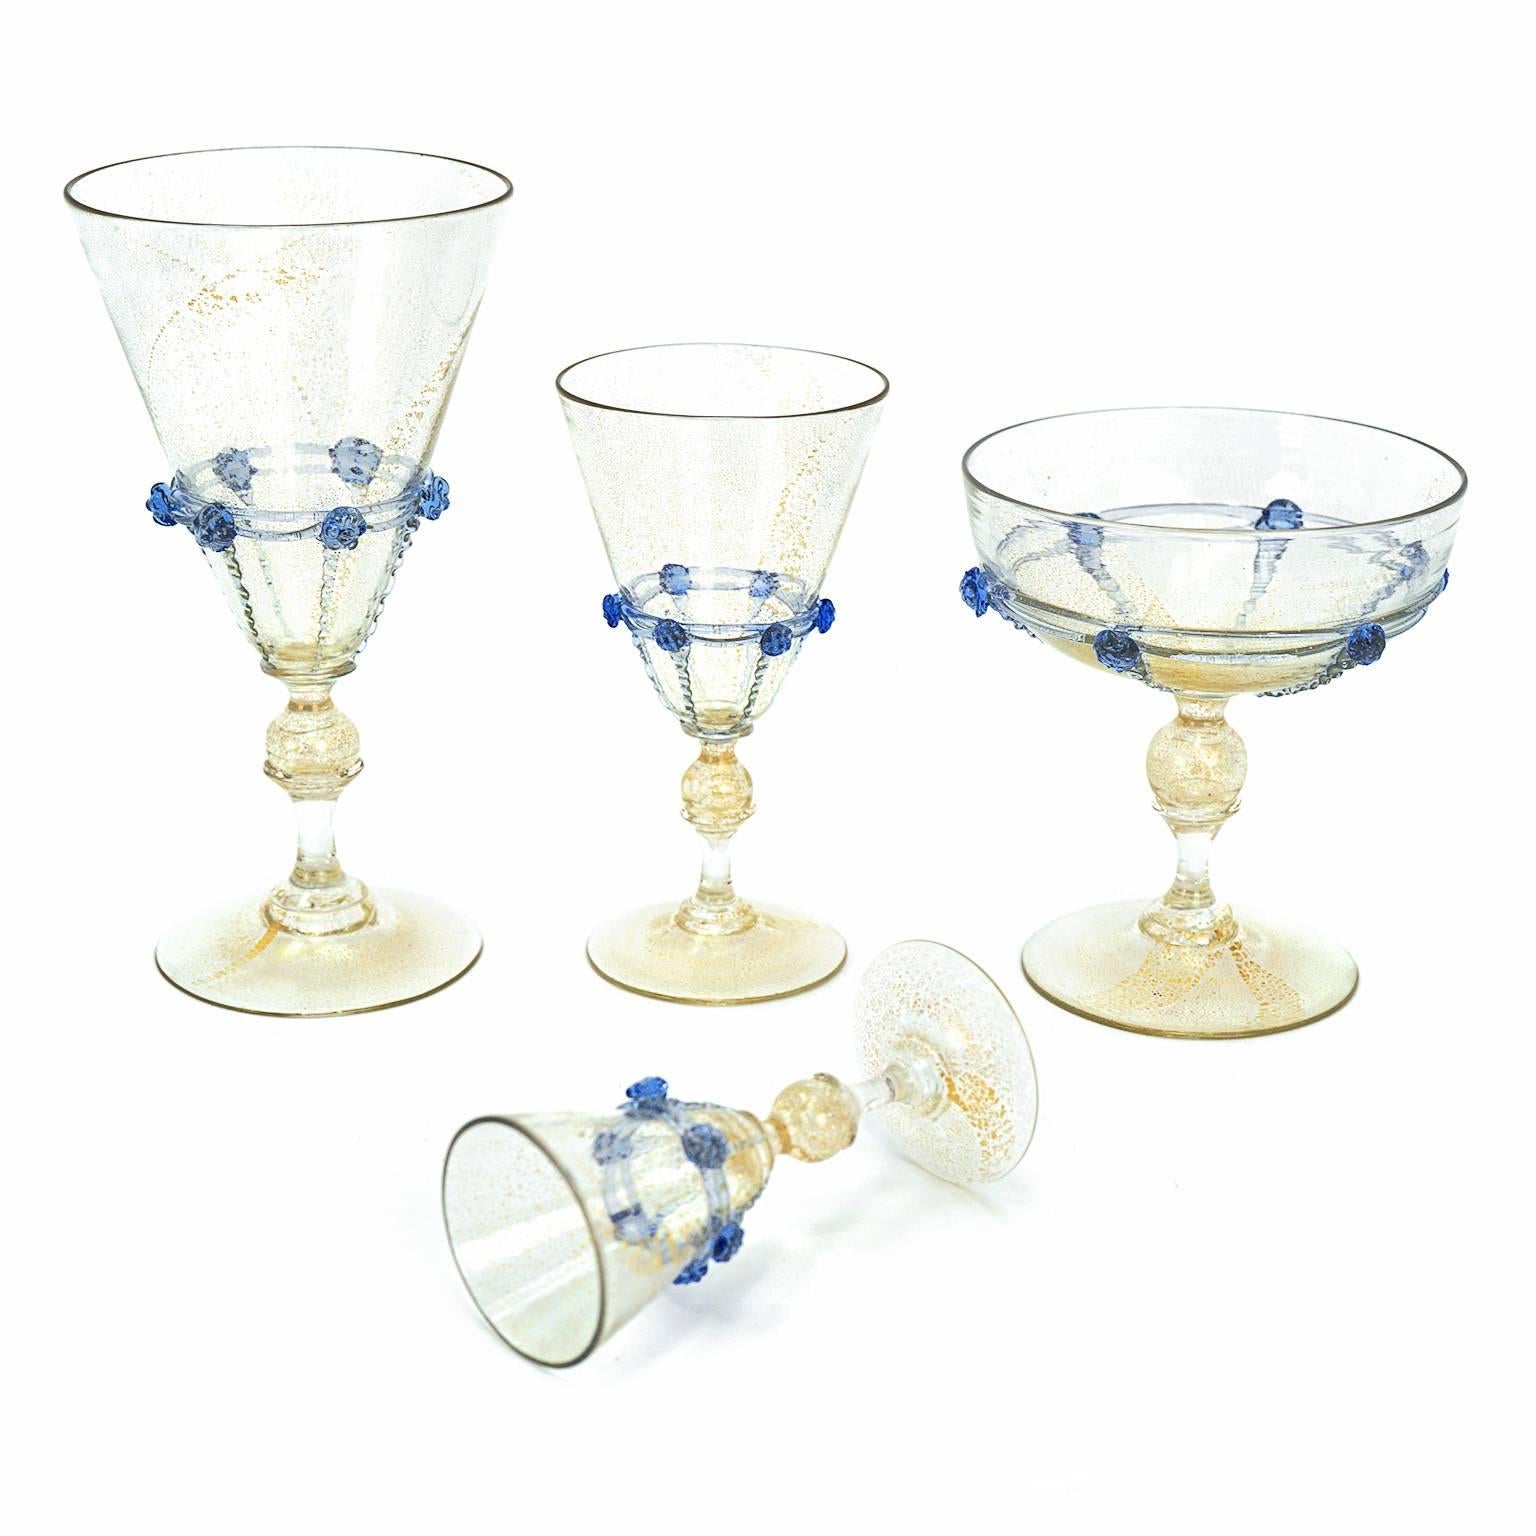 Early 20th Century Large Art Deco Venetian Glass, Set for 14